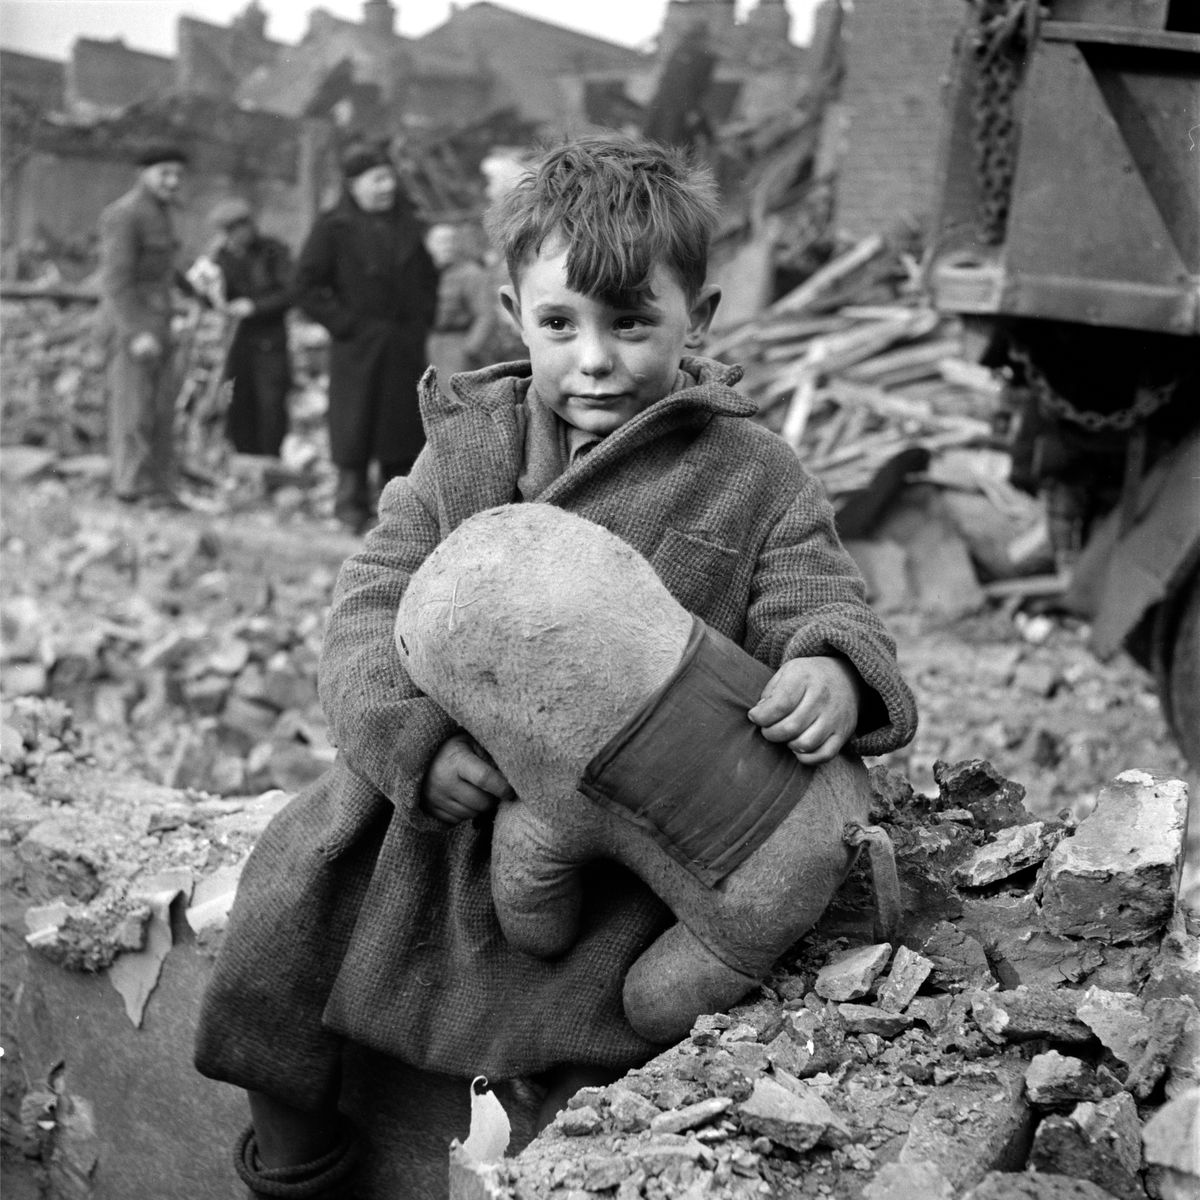 Abandoned Boy by Toni Frissell - 1945